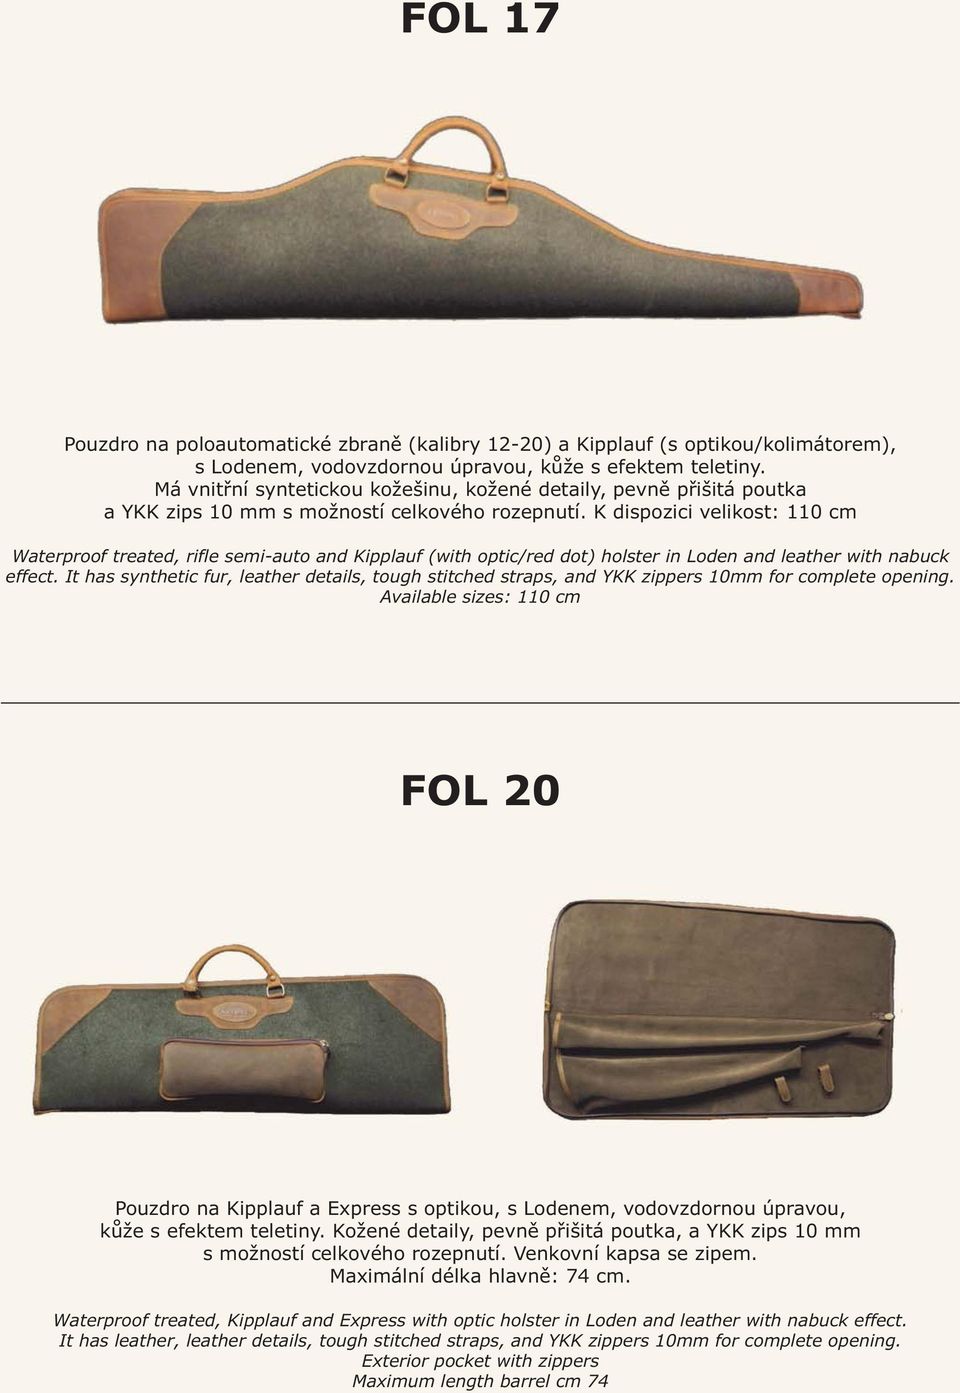 K dispozici velikost: 110 cm Waterproof treated, rifle semi-auto and Kipplauf (with optic/red dot) holster in Loden and leather with nabuck effect.